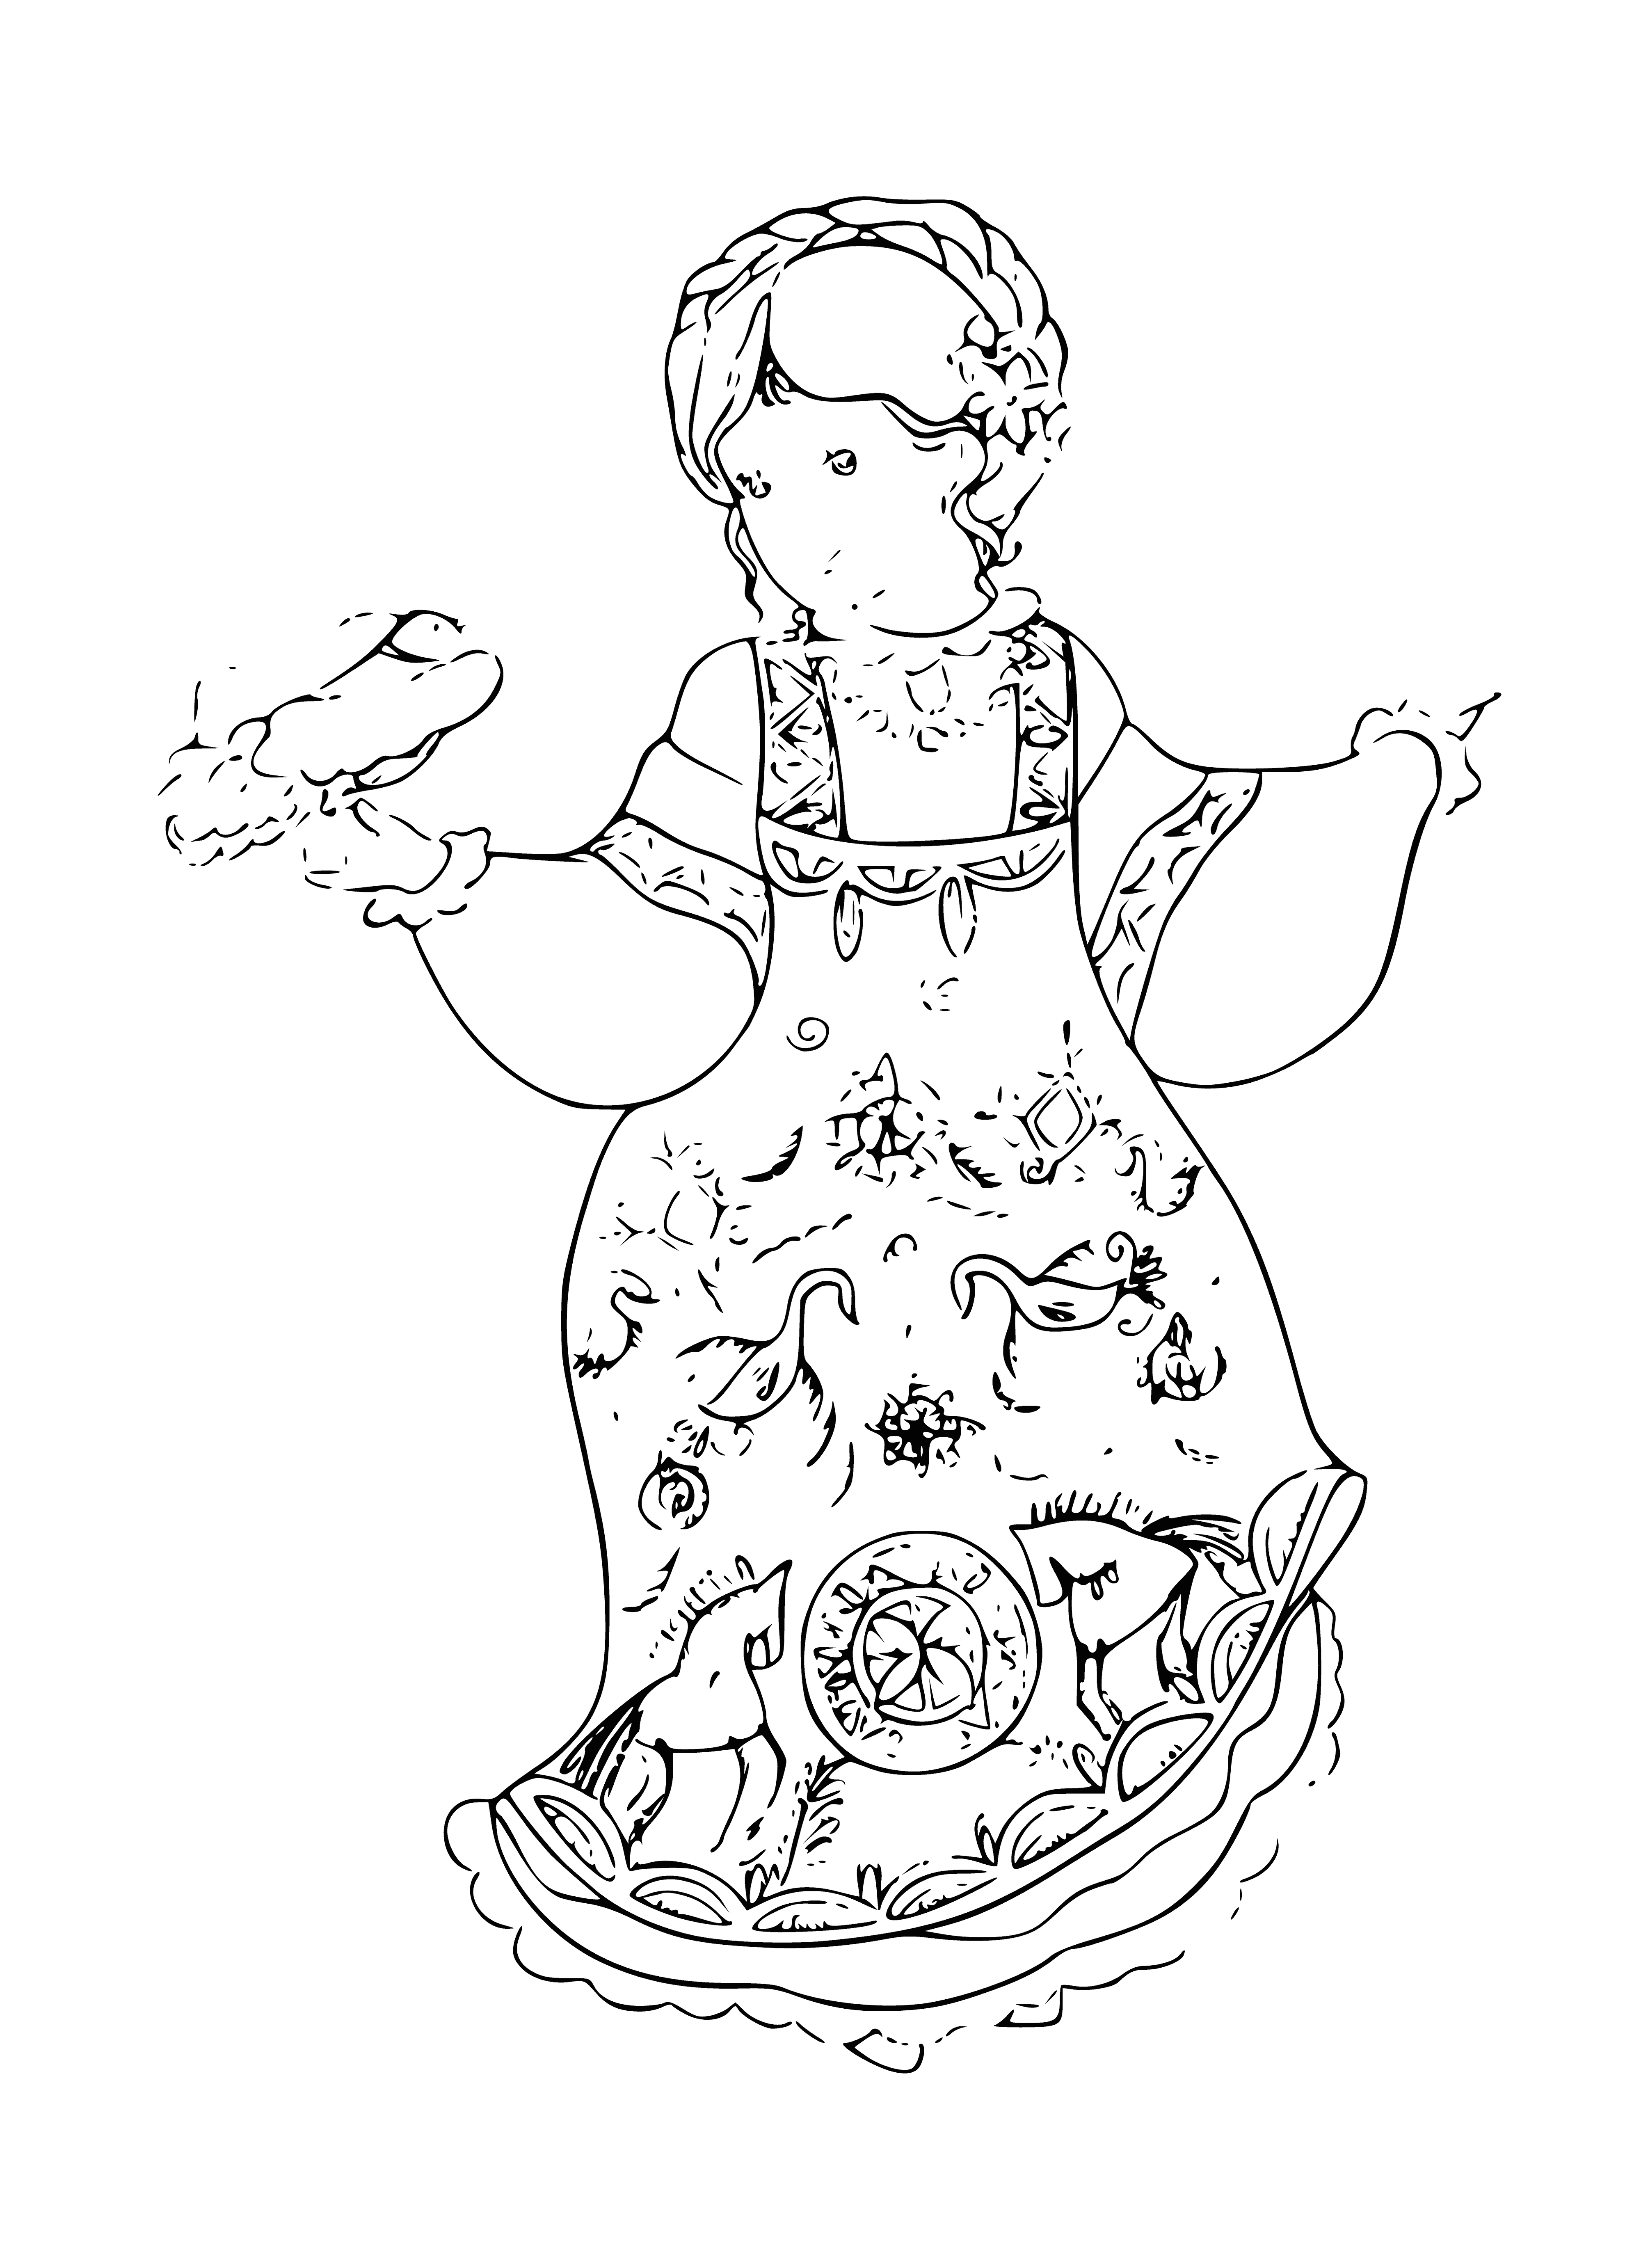 Patterned dress coloring page